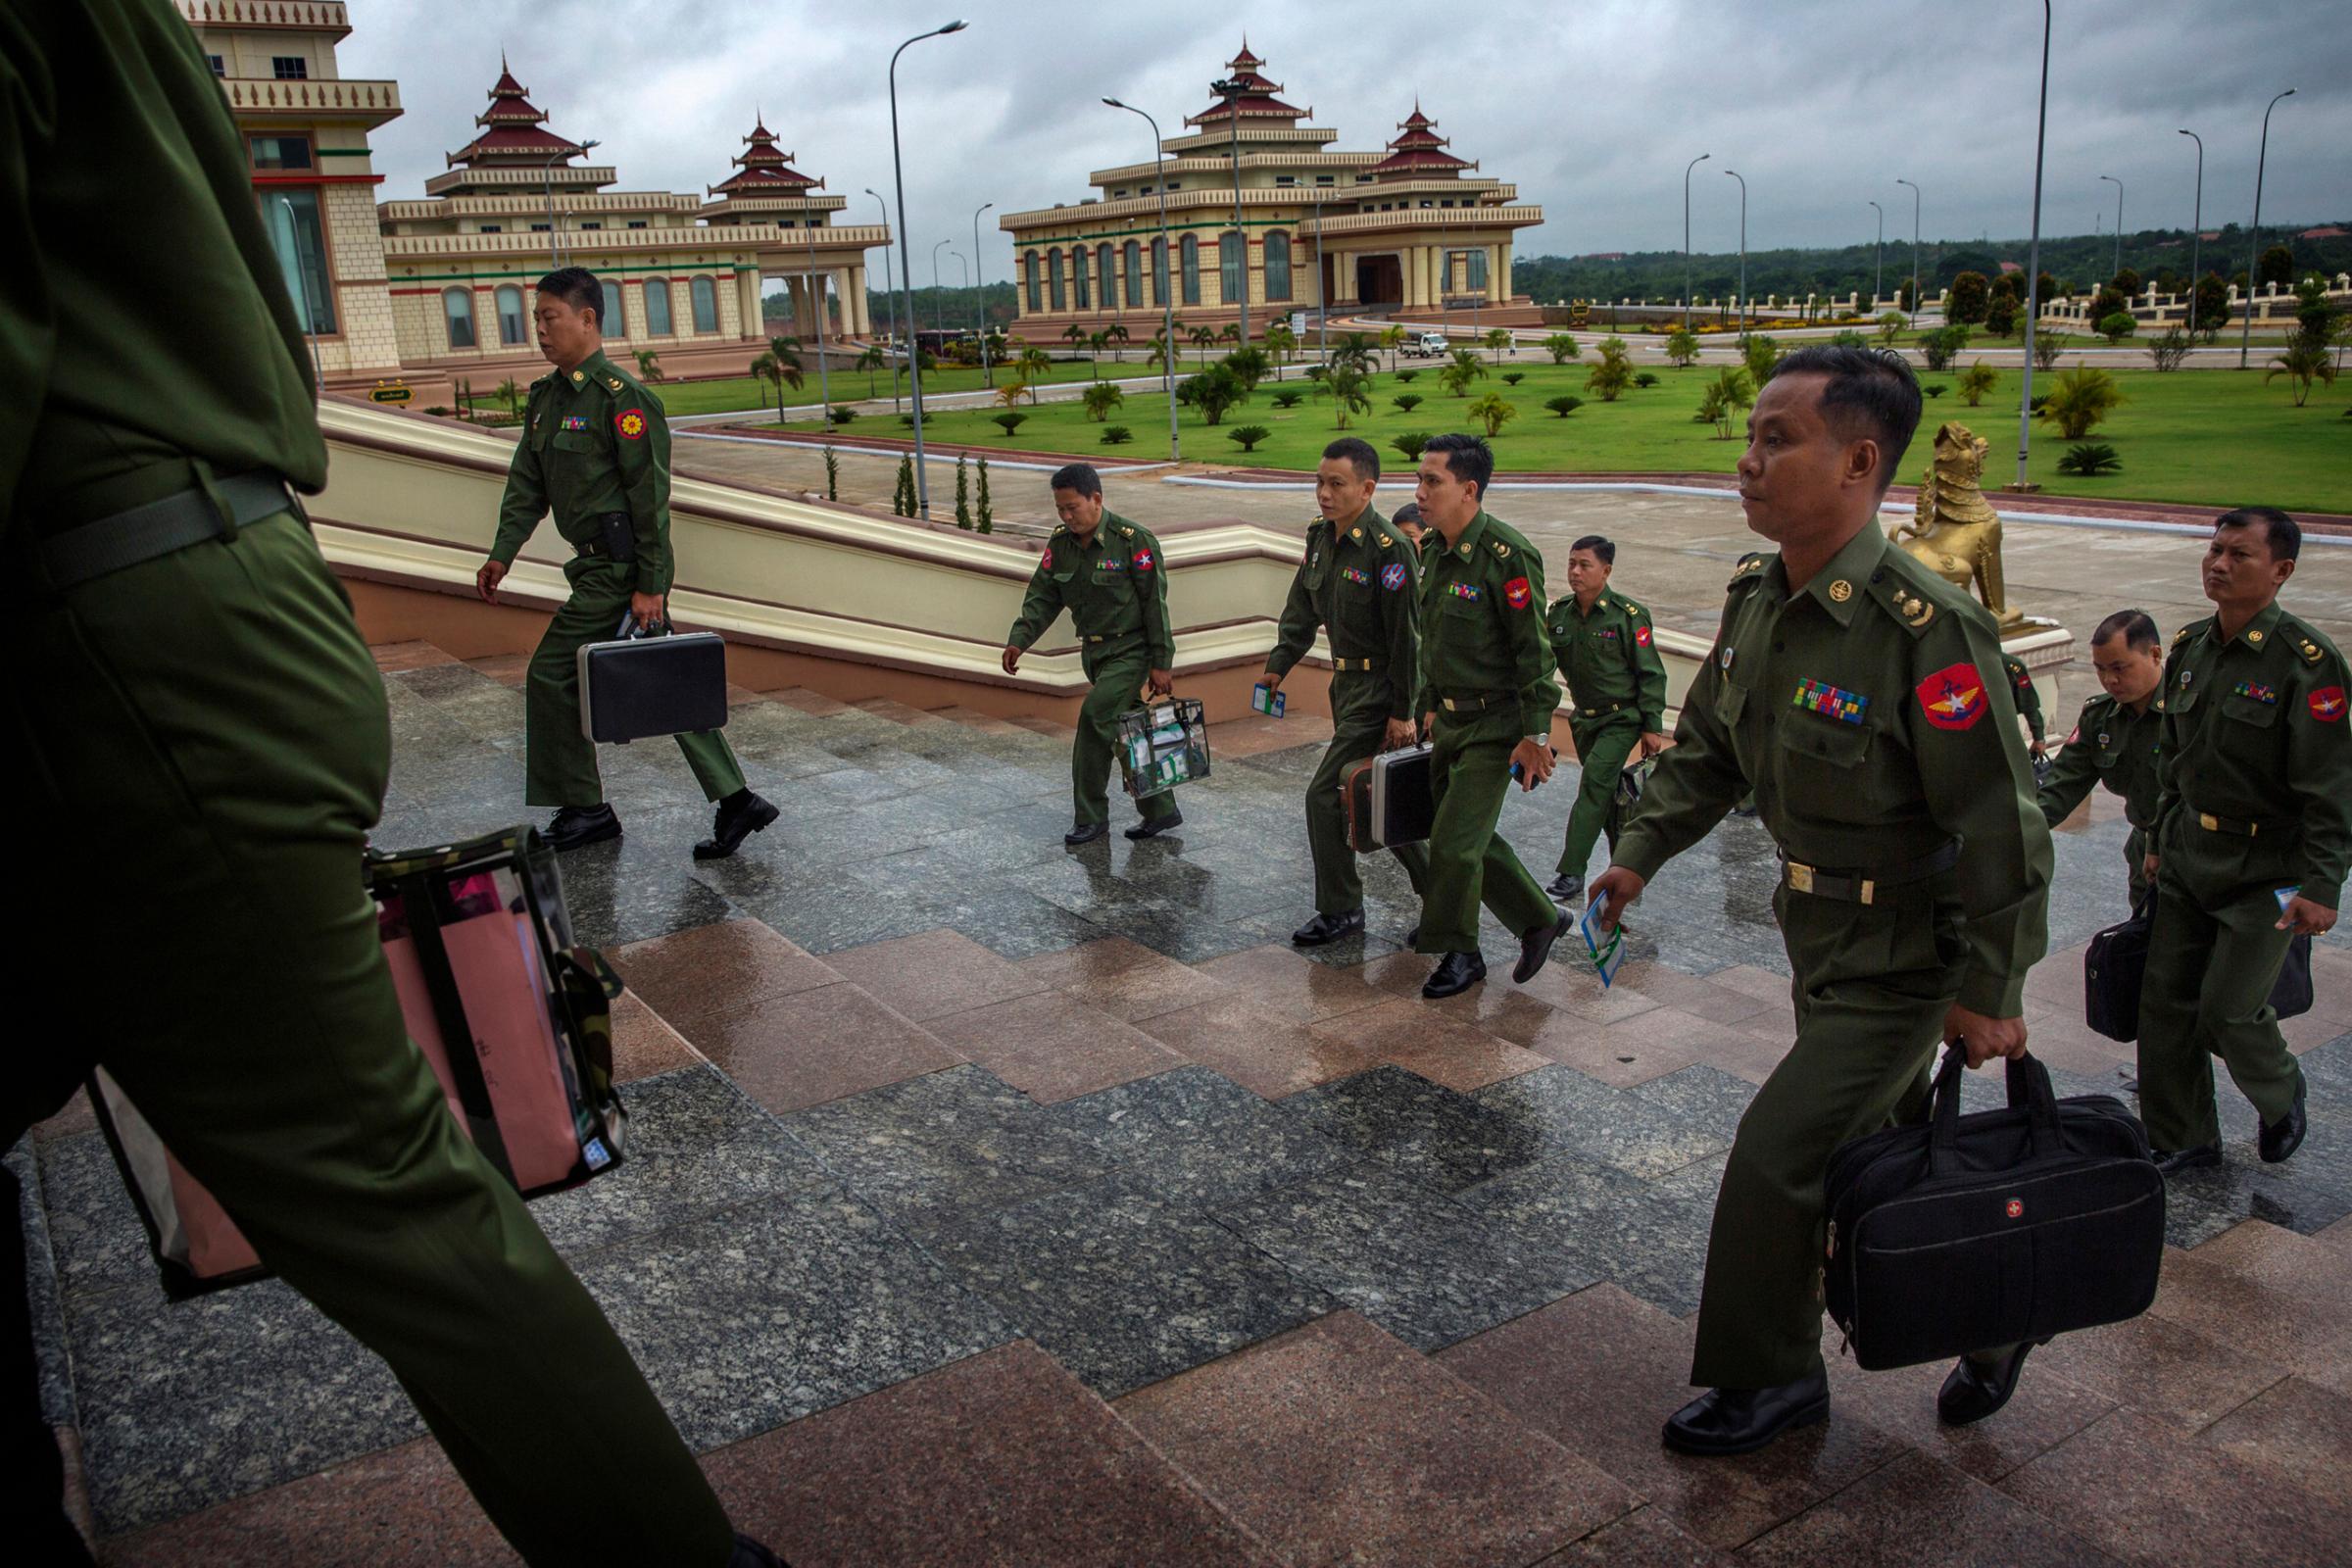 MPs representing the military arrive for a parliamentary session in the Naypyidaw, Burma,  June 20th, 2014.